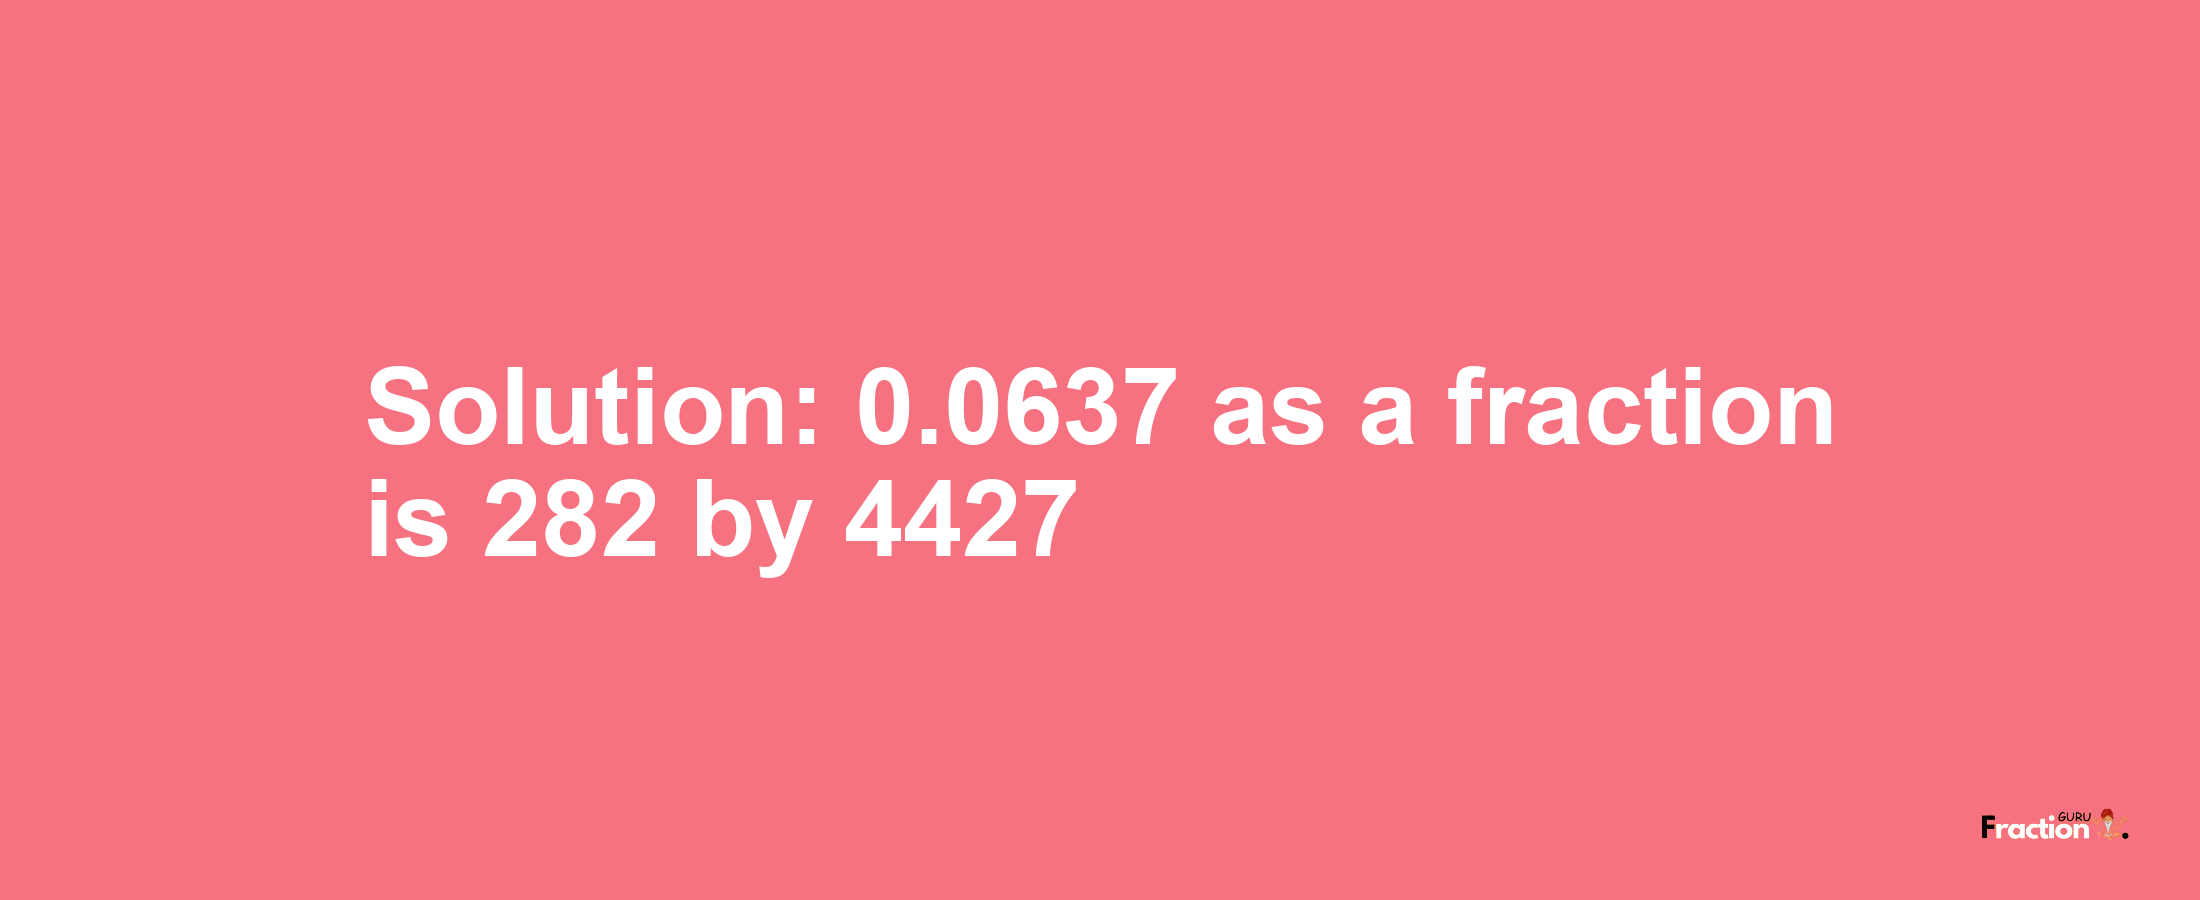 Solution:0.0637 as a fraction is 282/4427